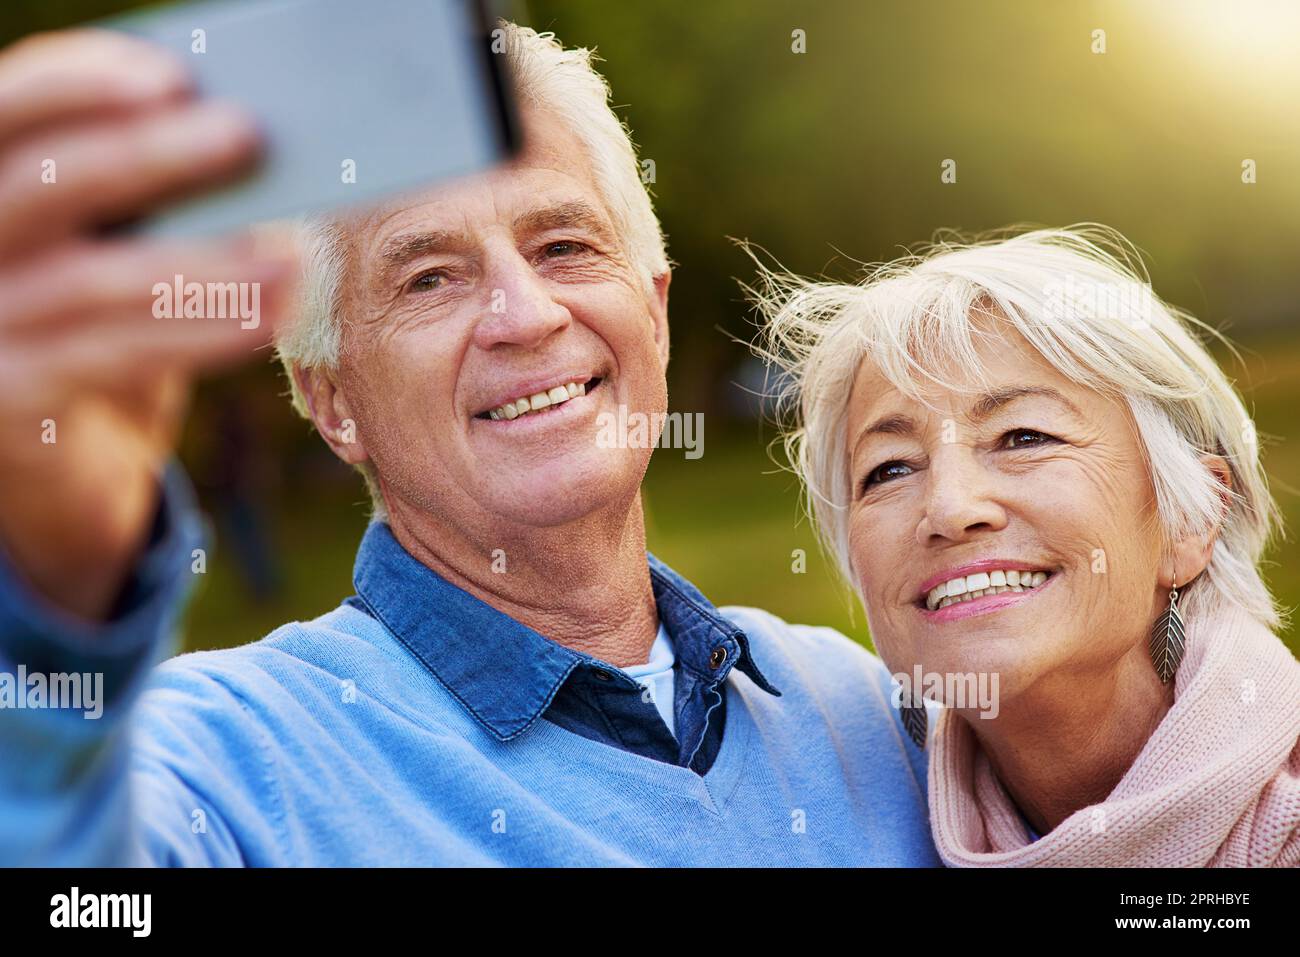 Broad smiles for the shot. a senior couple taking a photo together in a park. Stock Photo